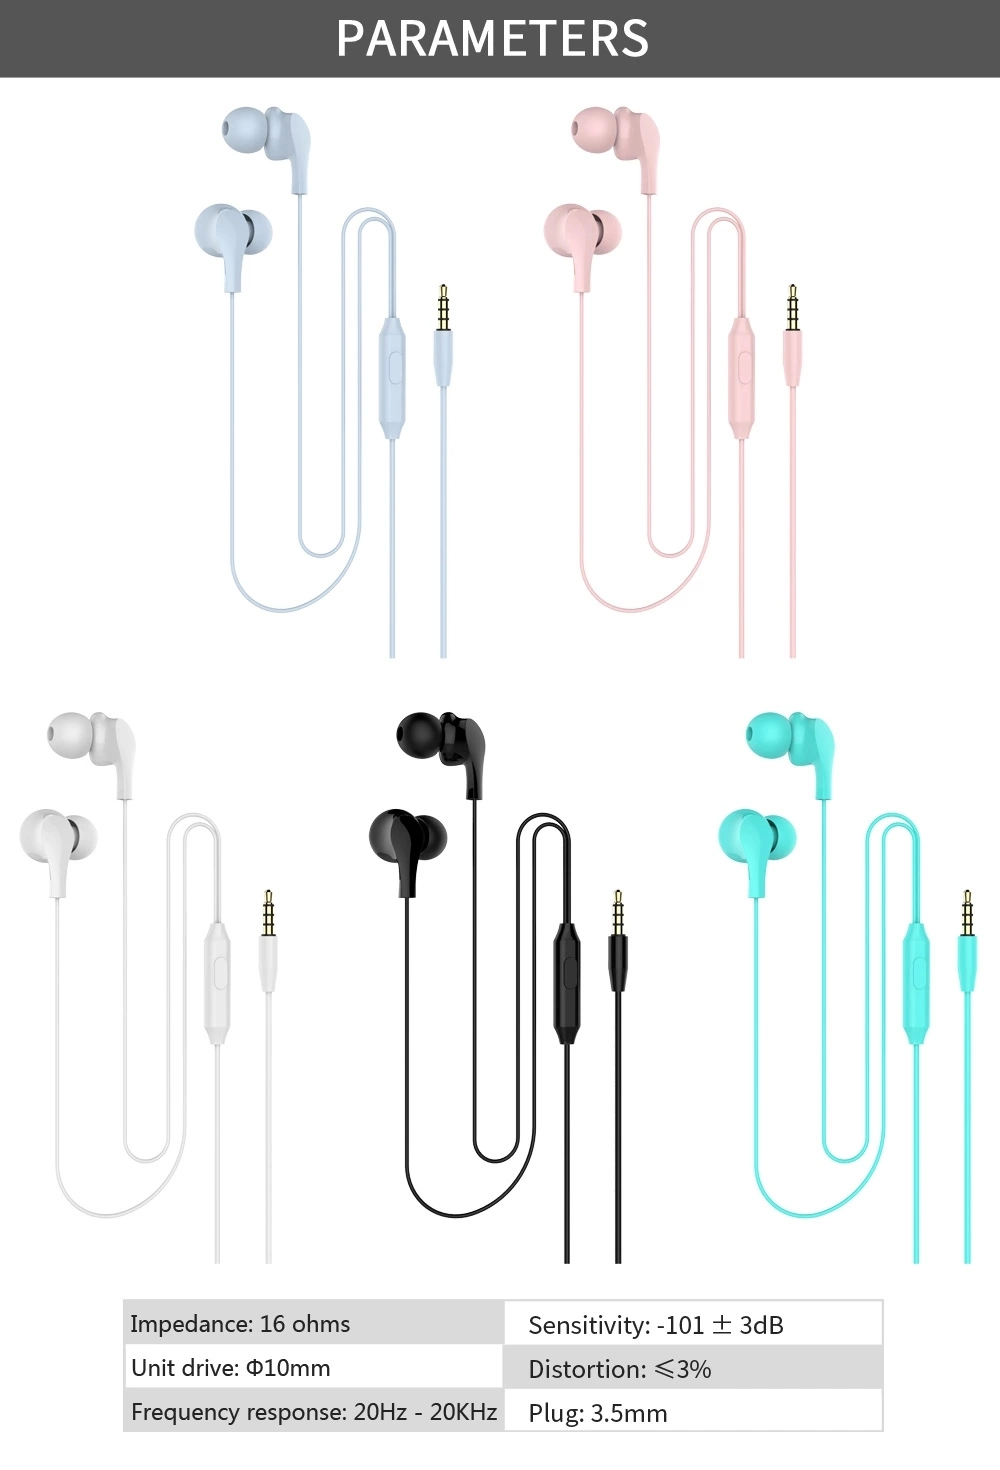 Wire 3.5mm Plug Communication Earphone with Mic Mobile Phone Earbuds Earpods